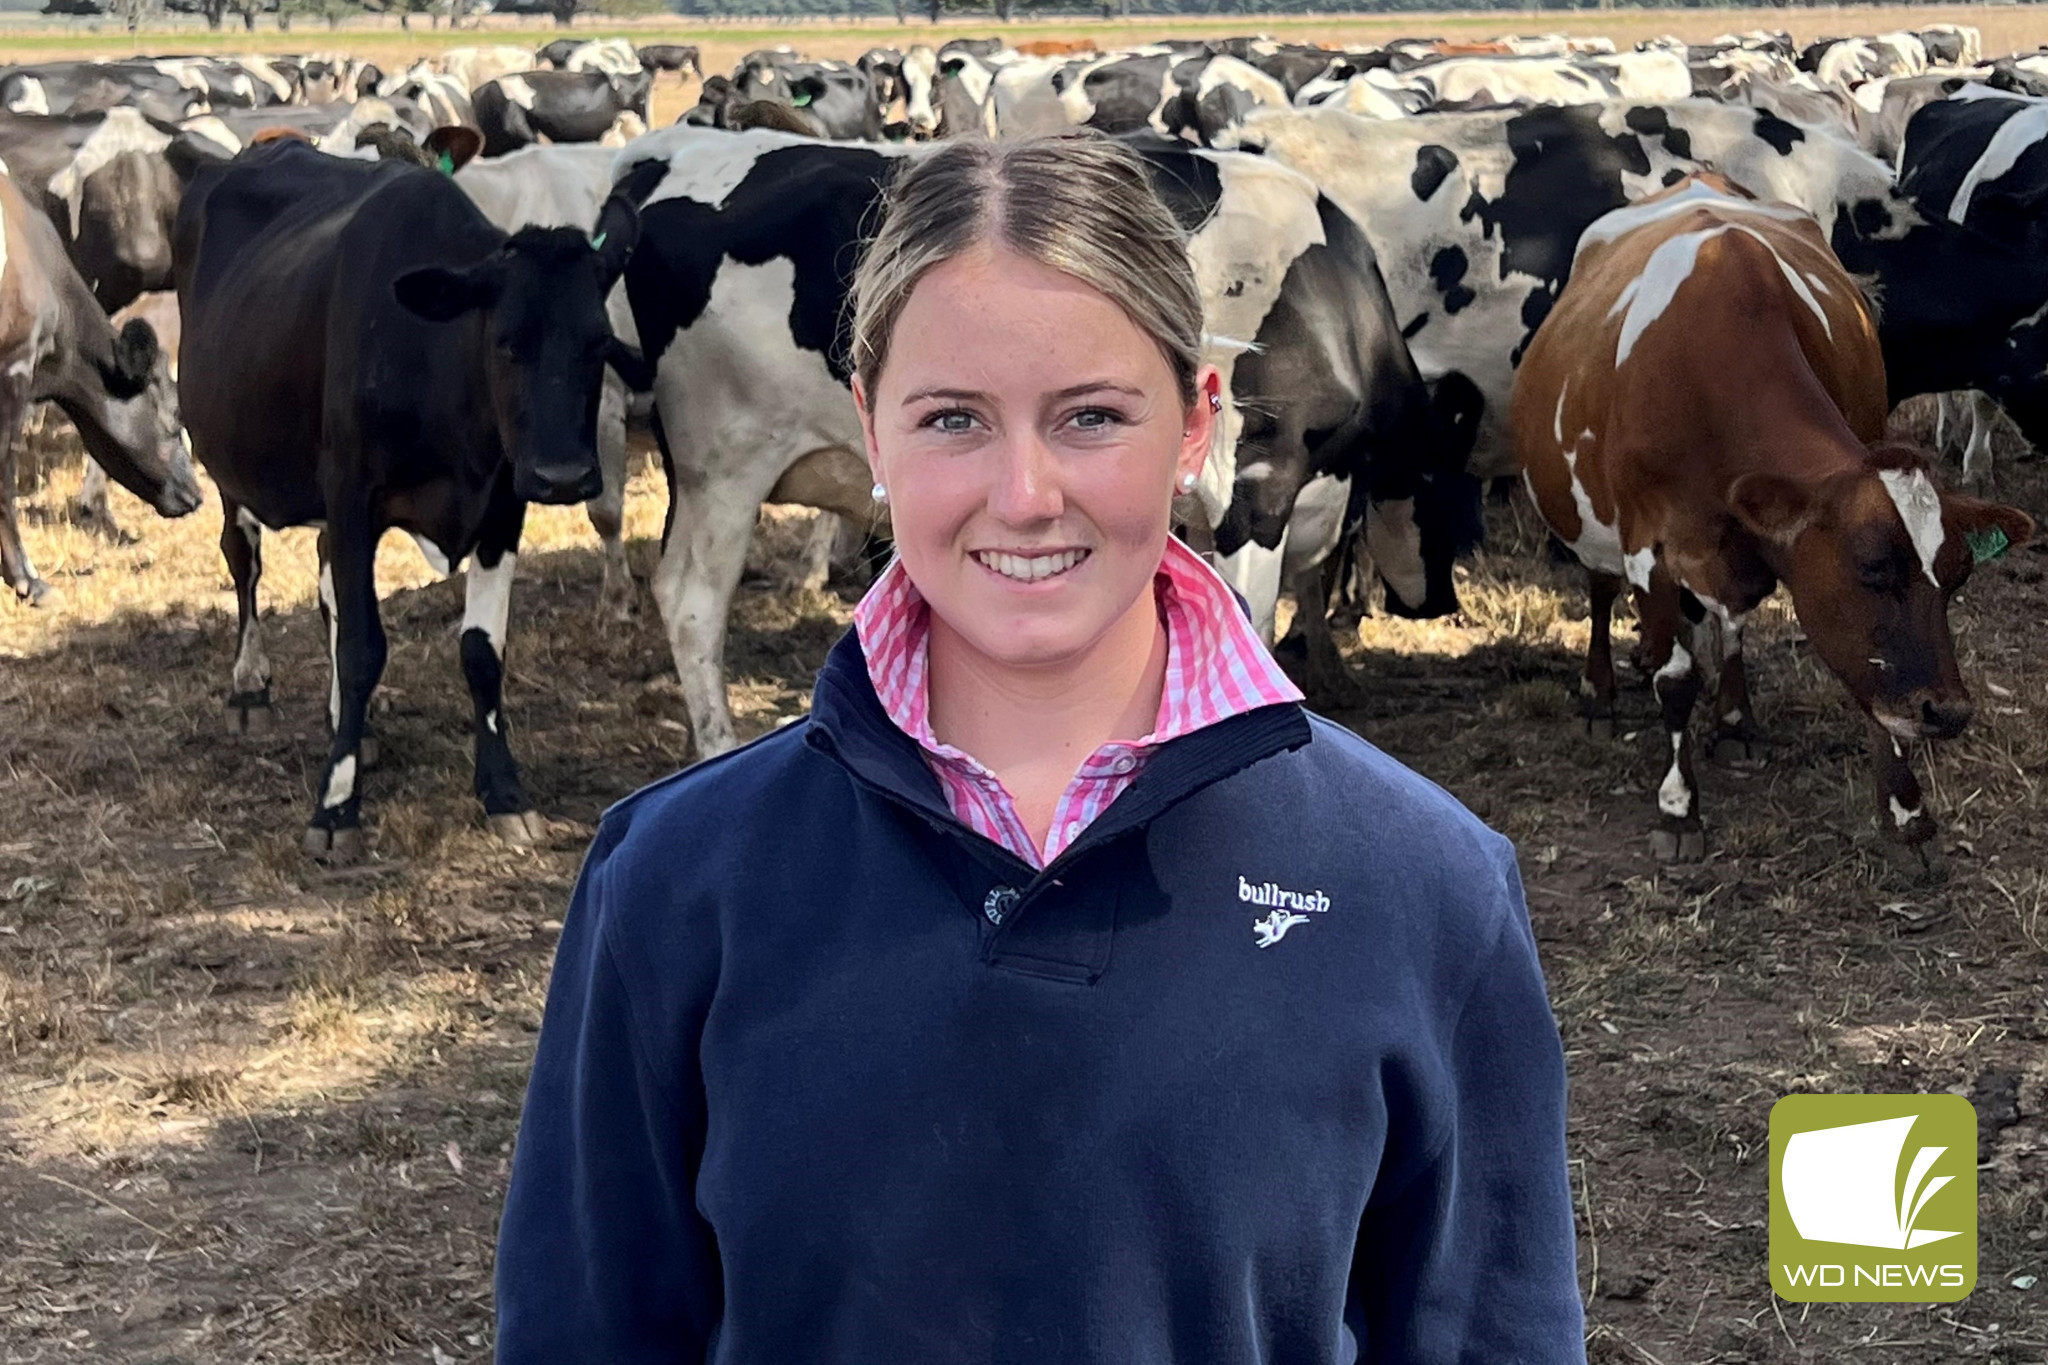 Dreaming big: Kiarna Murfett, 18, has made full use of a DemoDAIRY Foundation scholarship as she works towards her aspiration of one day managing her own farm.